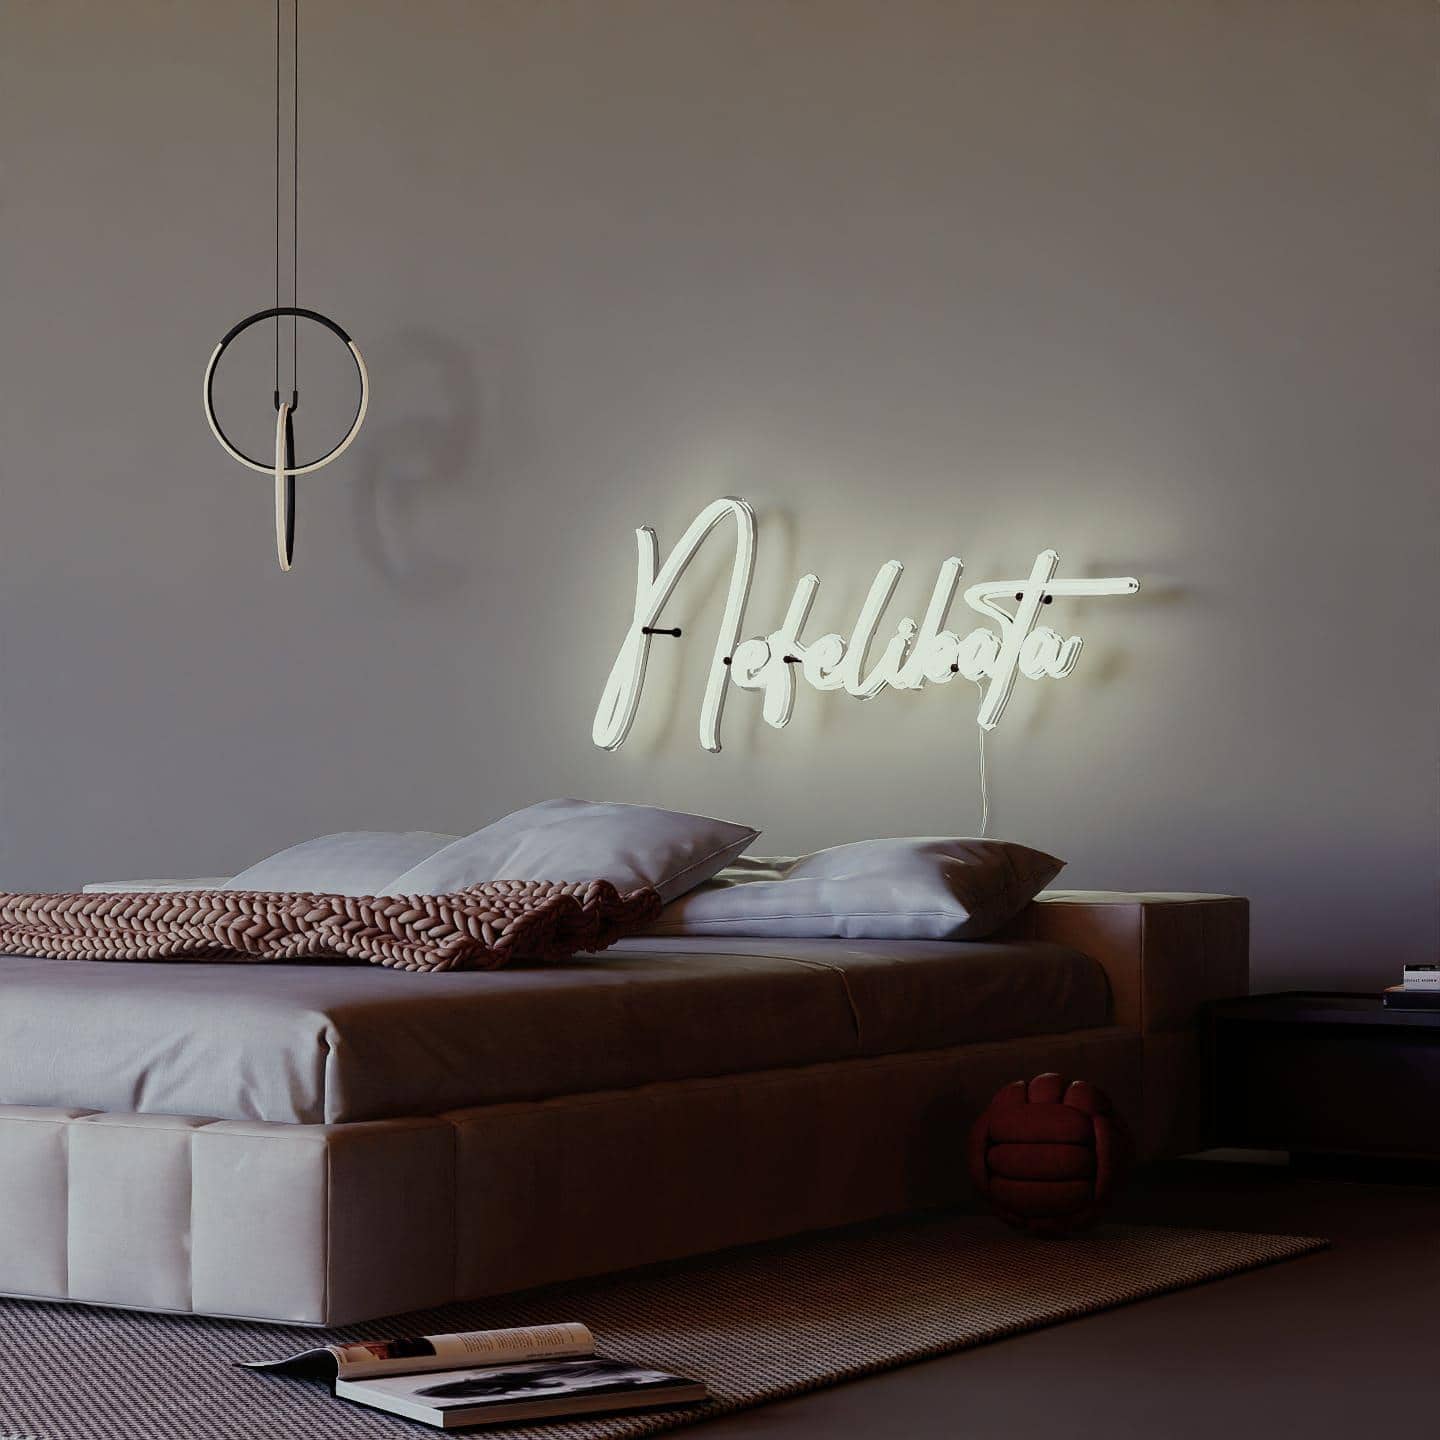 shot-of-lit-white-neon-lights-hanging-on-the-wall